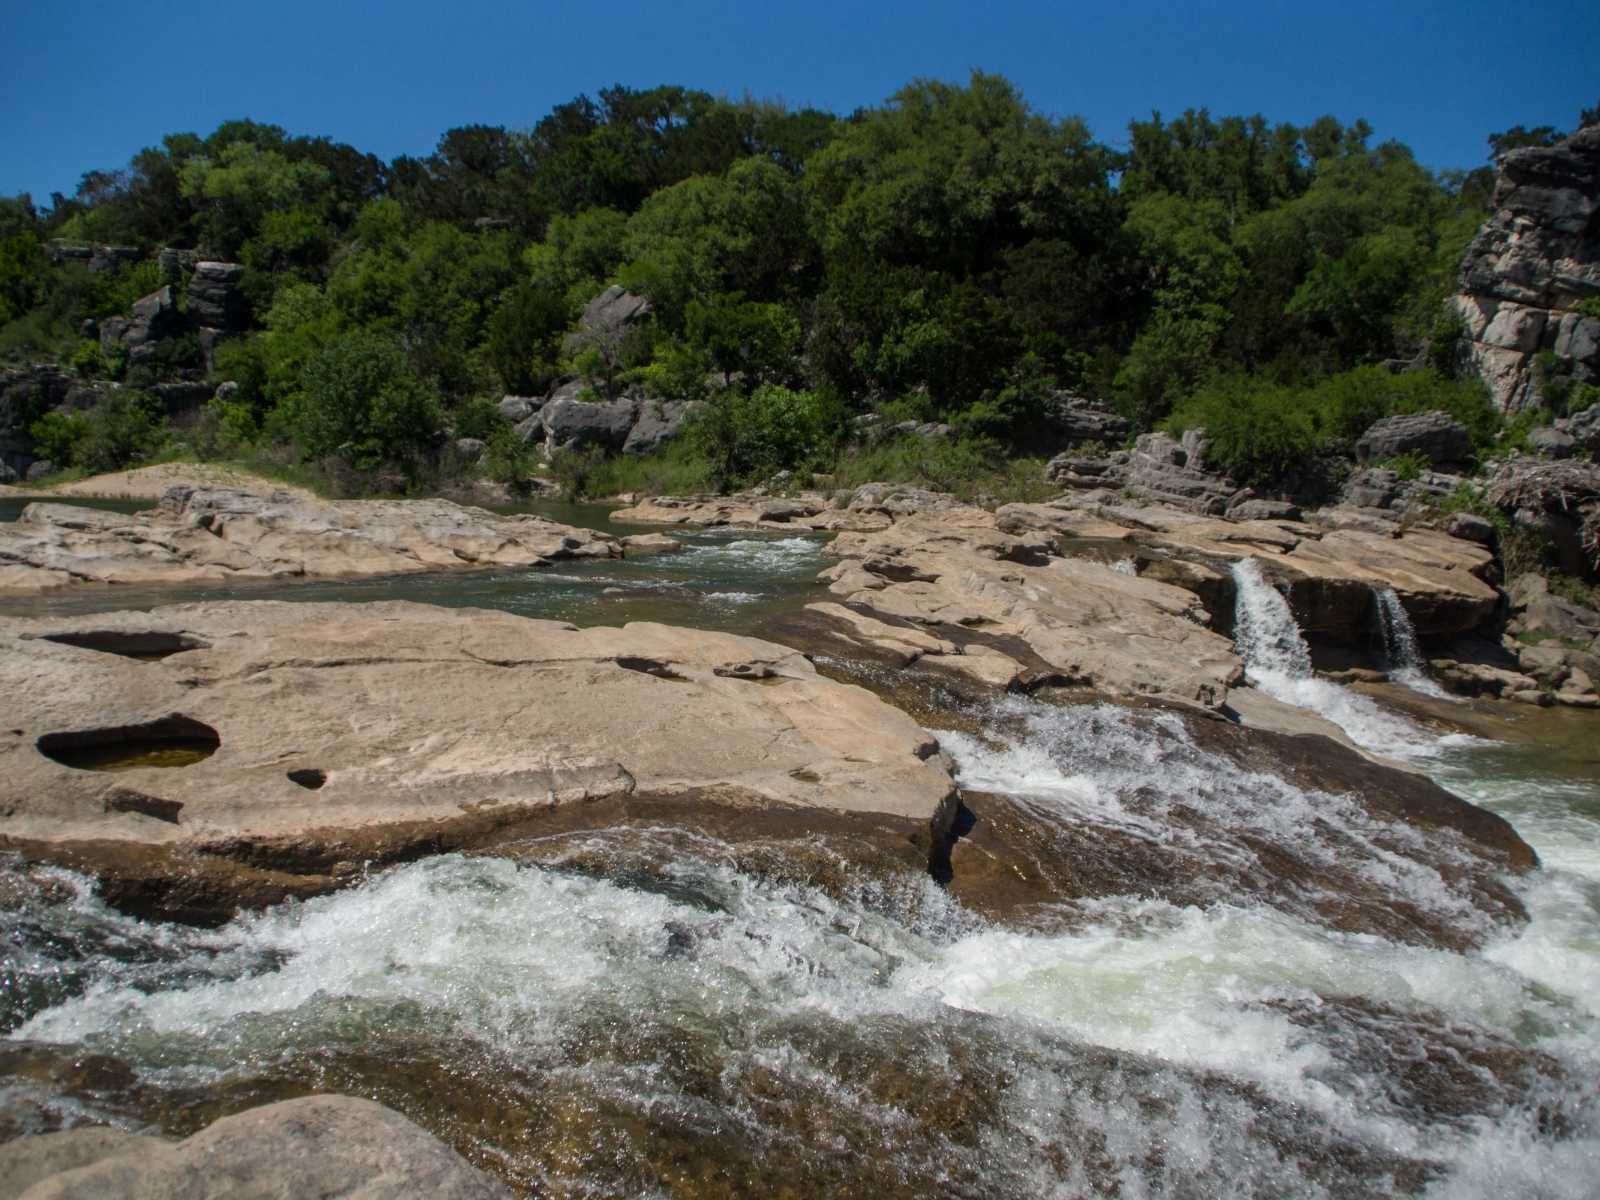 the falls at Pedernales Falls, one of the state parks near San Antonio